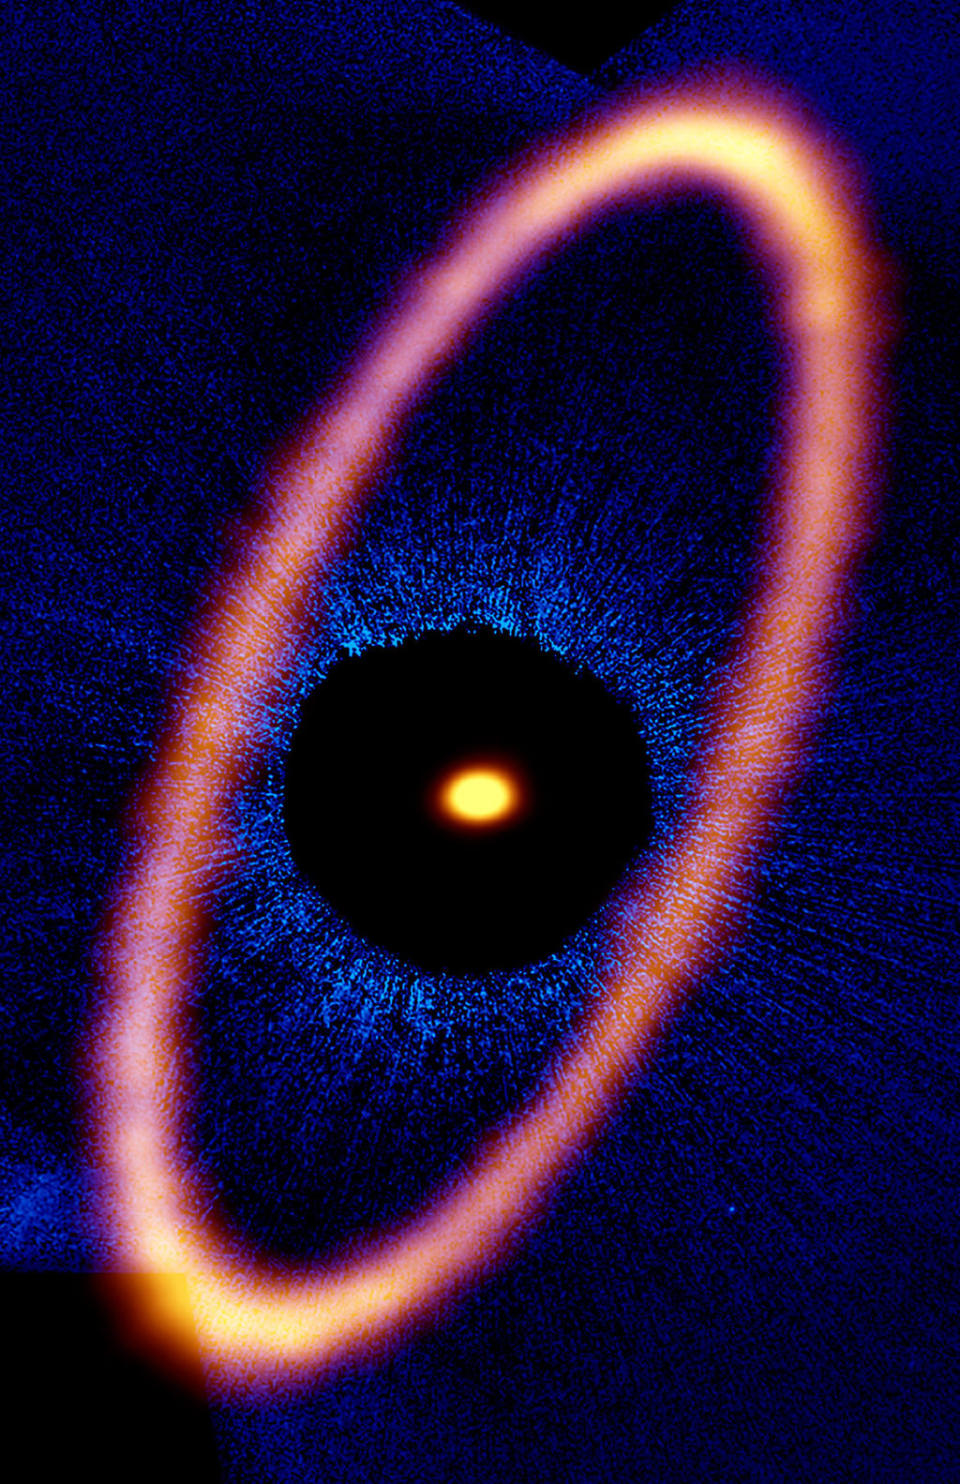 Star's Comet-Like Icy Debris Ring Captured in New Video, Images